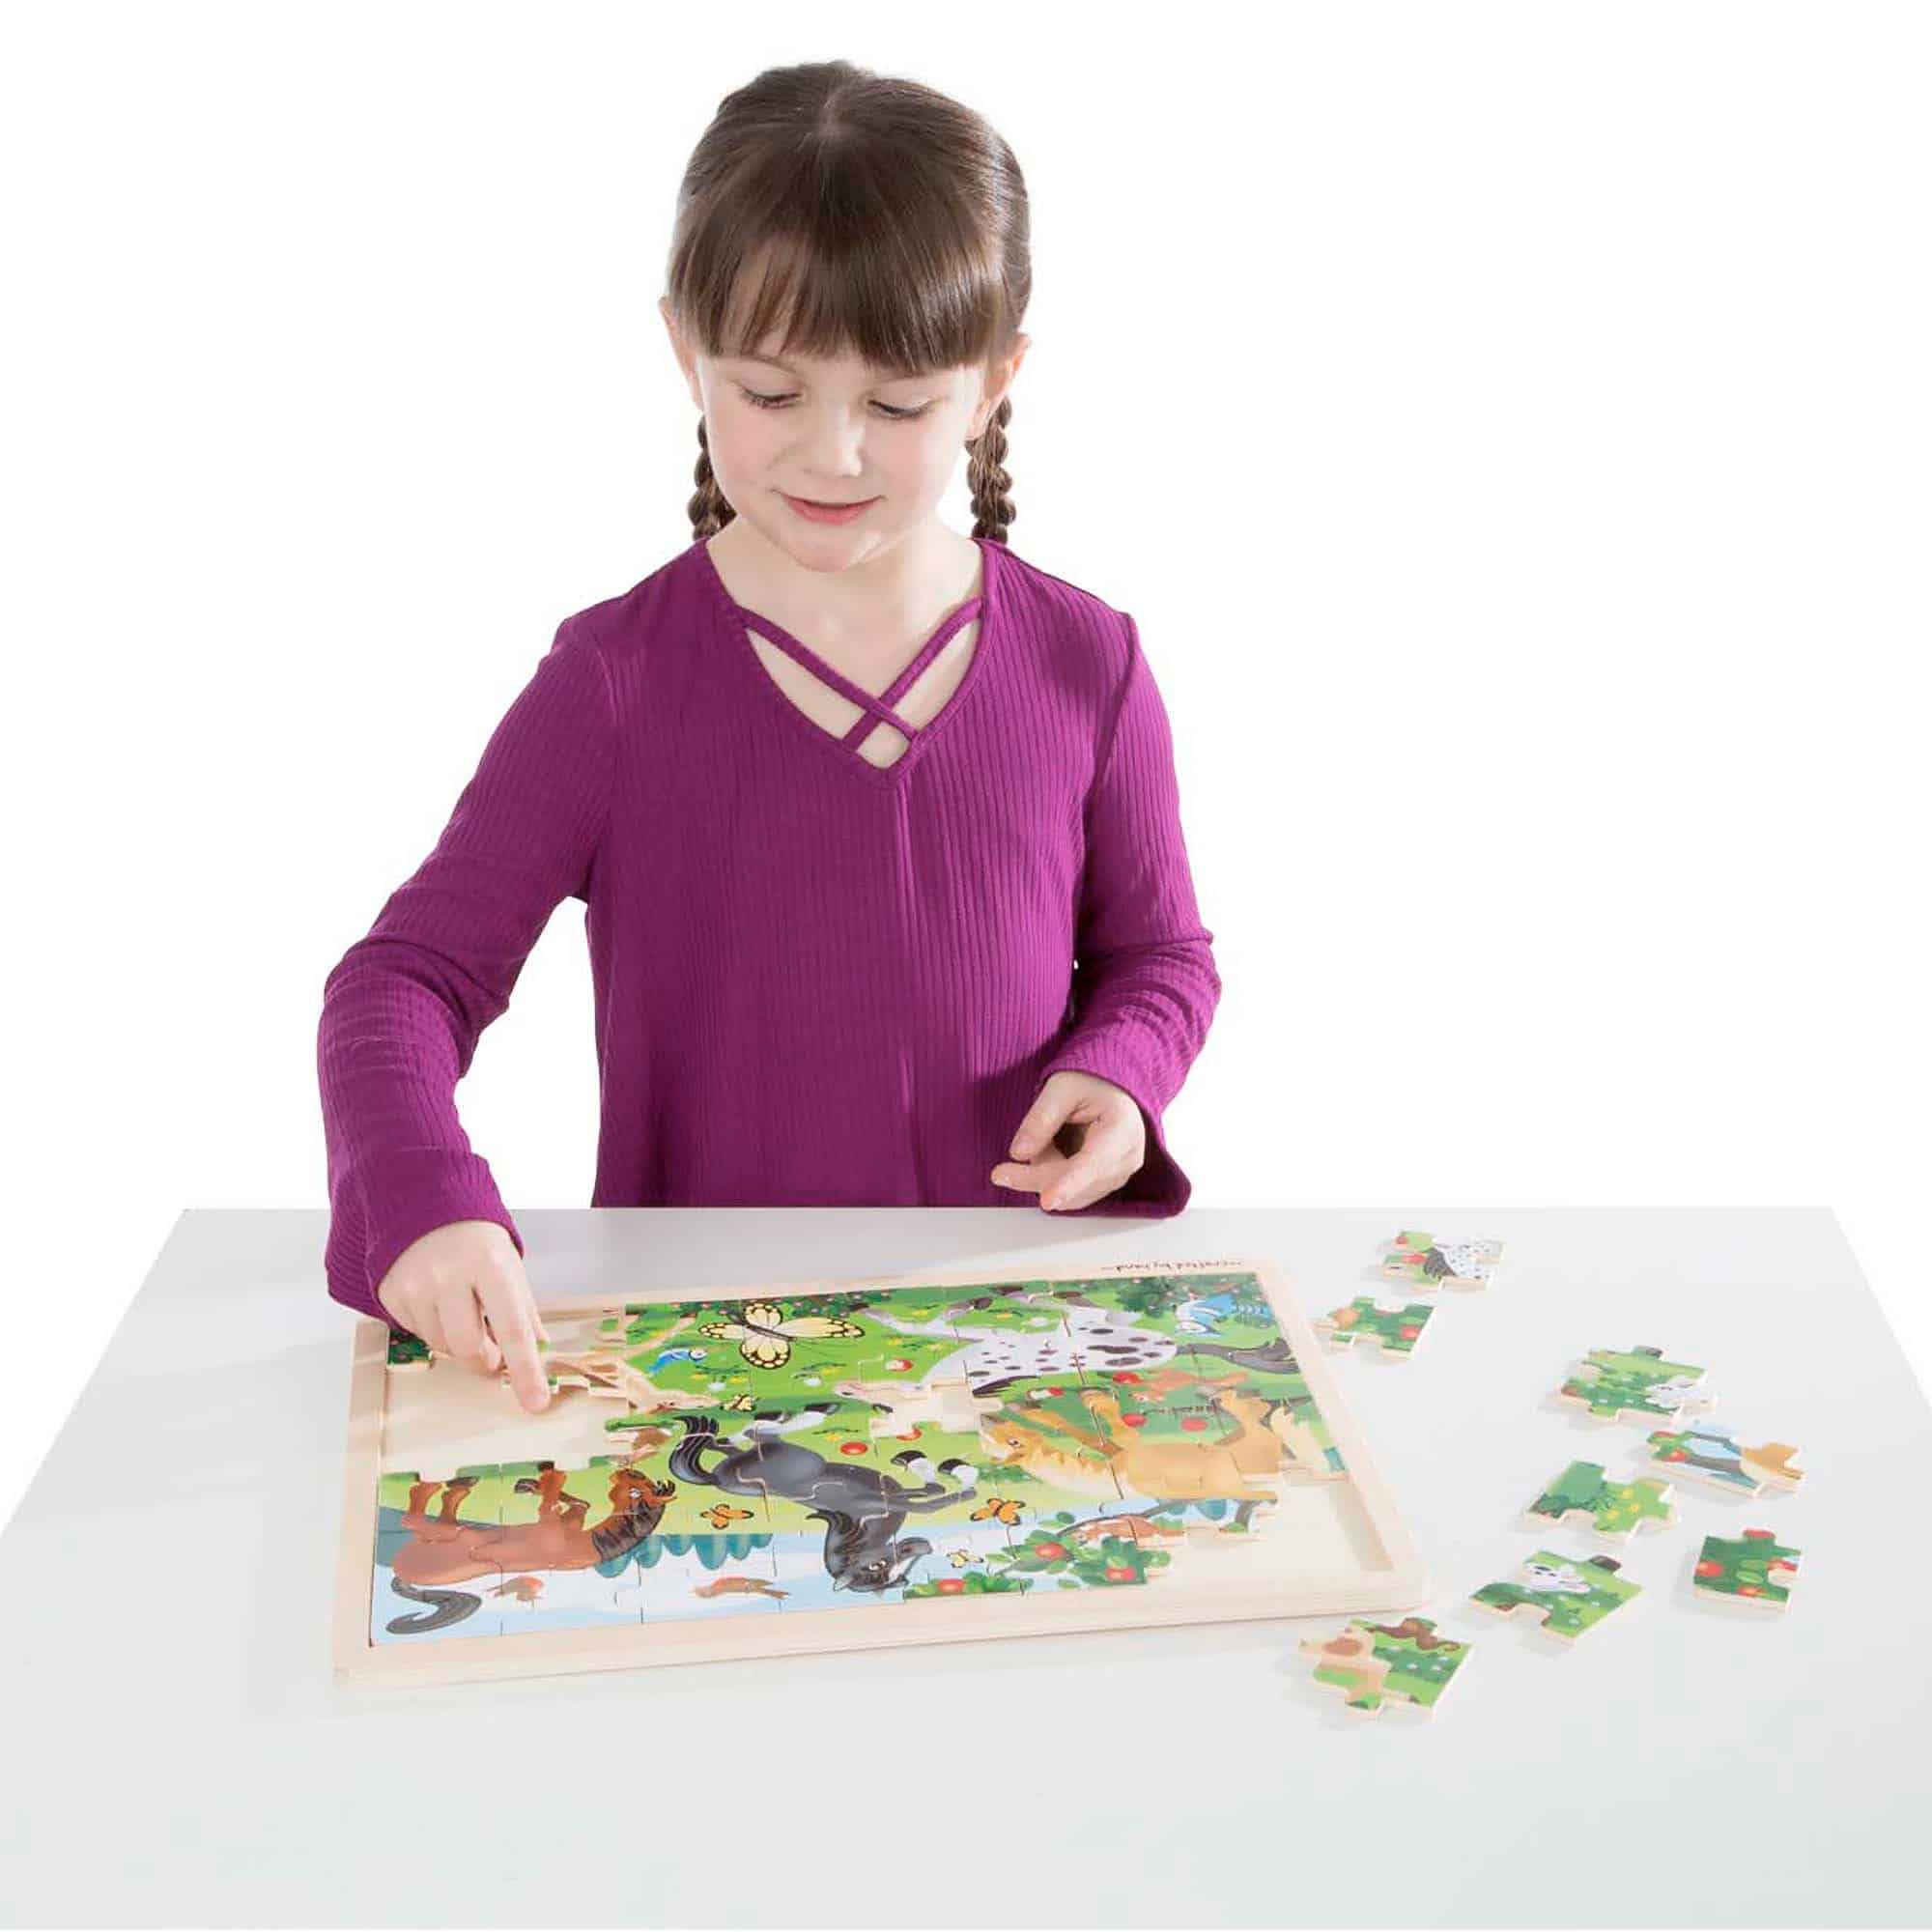 Melissa and Doug - Frolicking Horses - 48 Piece Jigsaw Puzzle